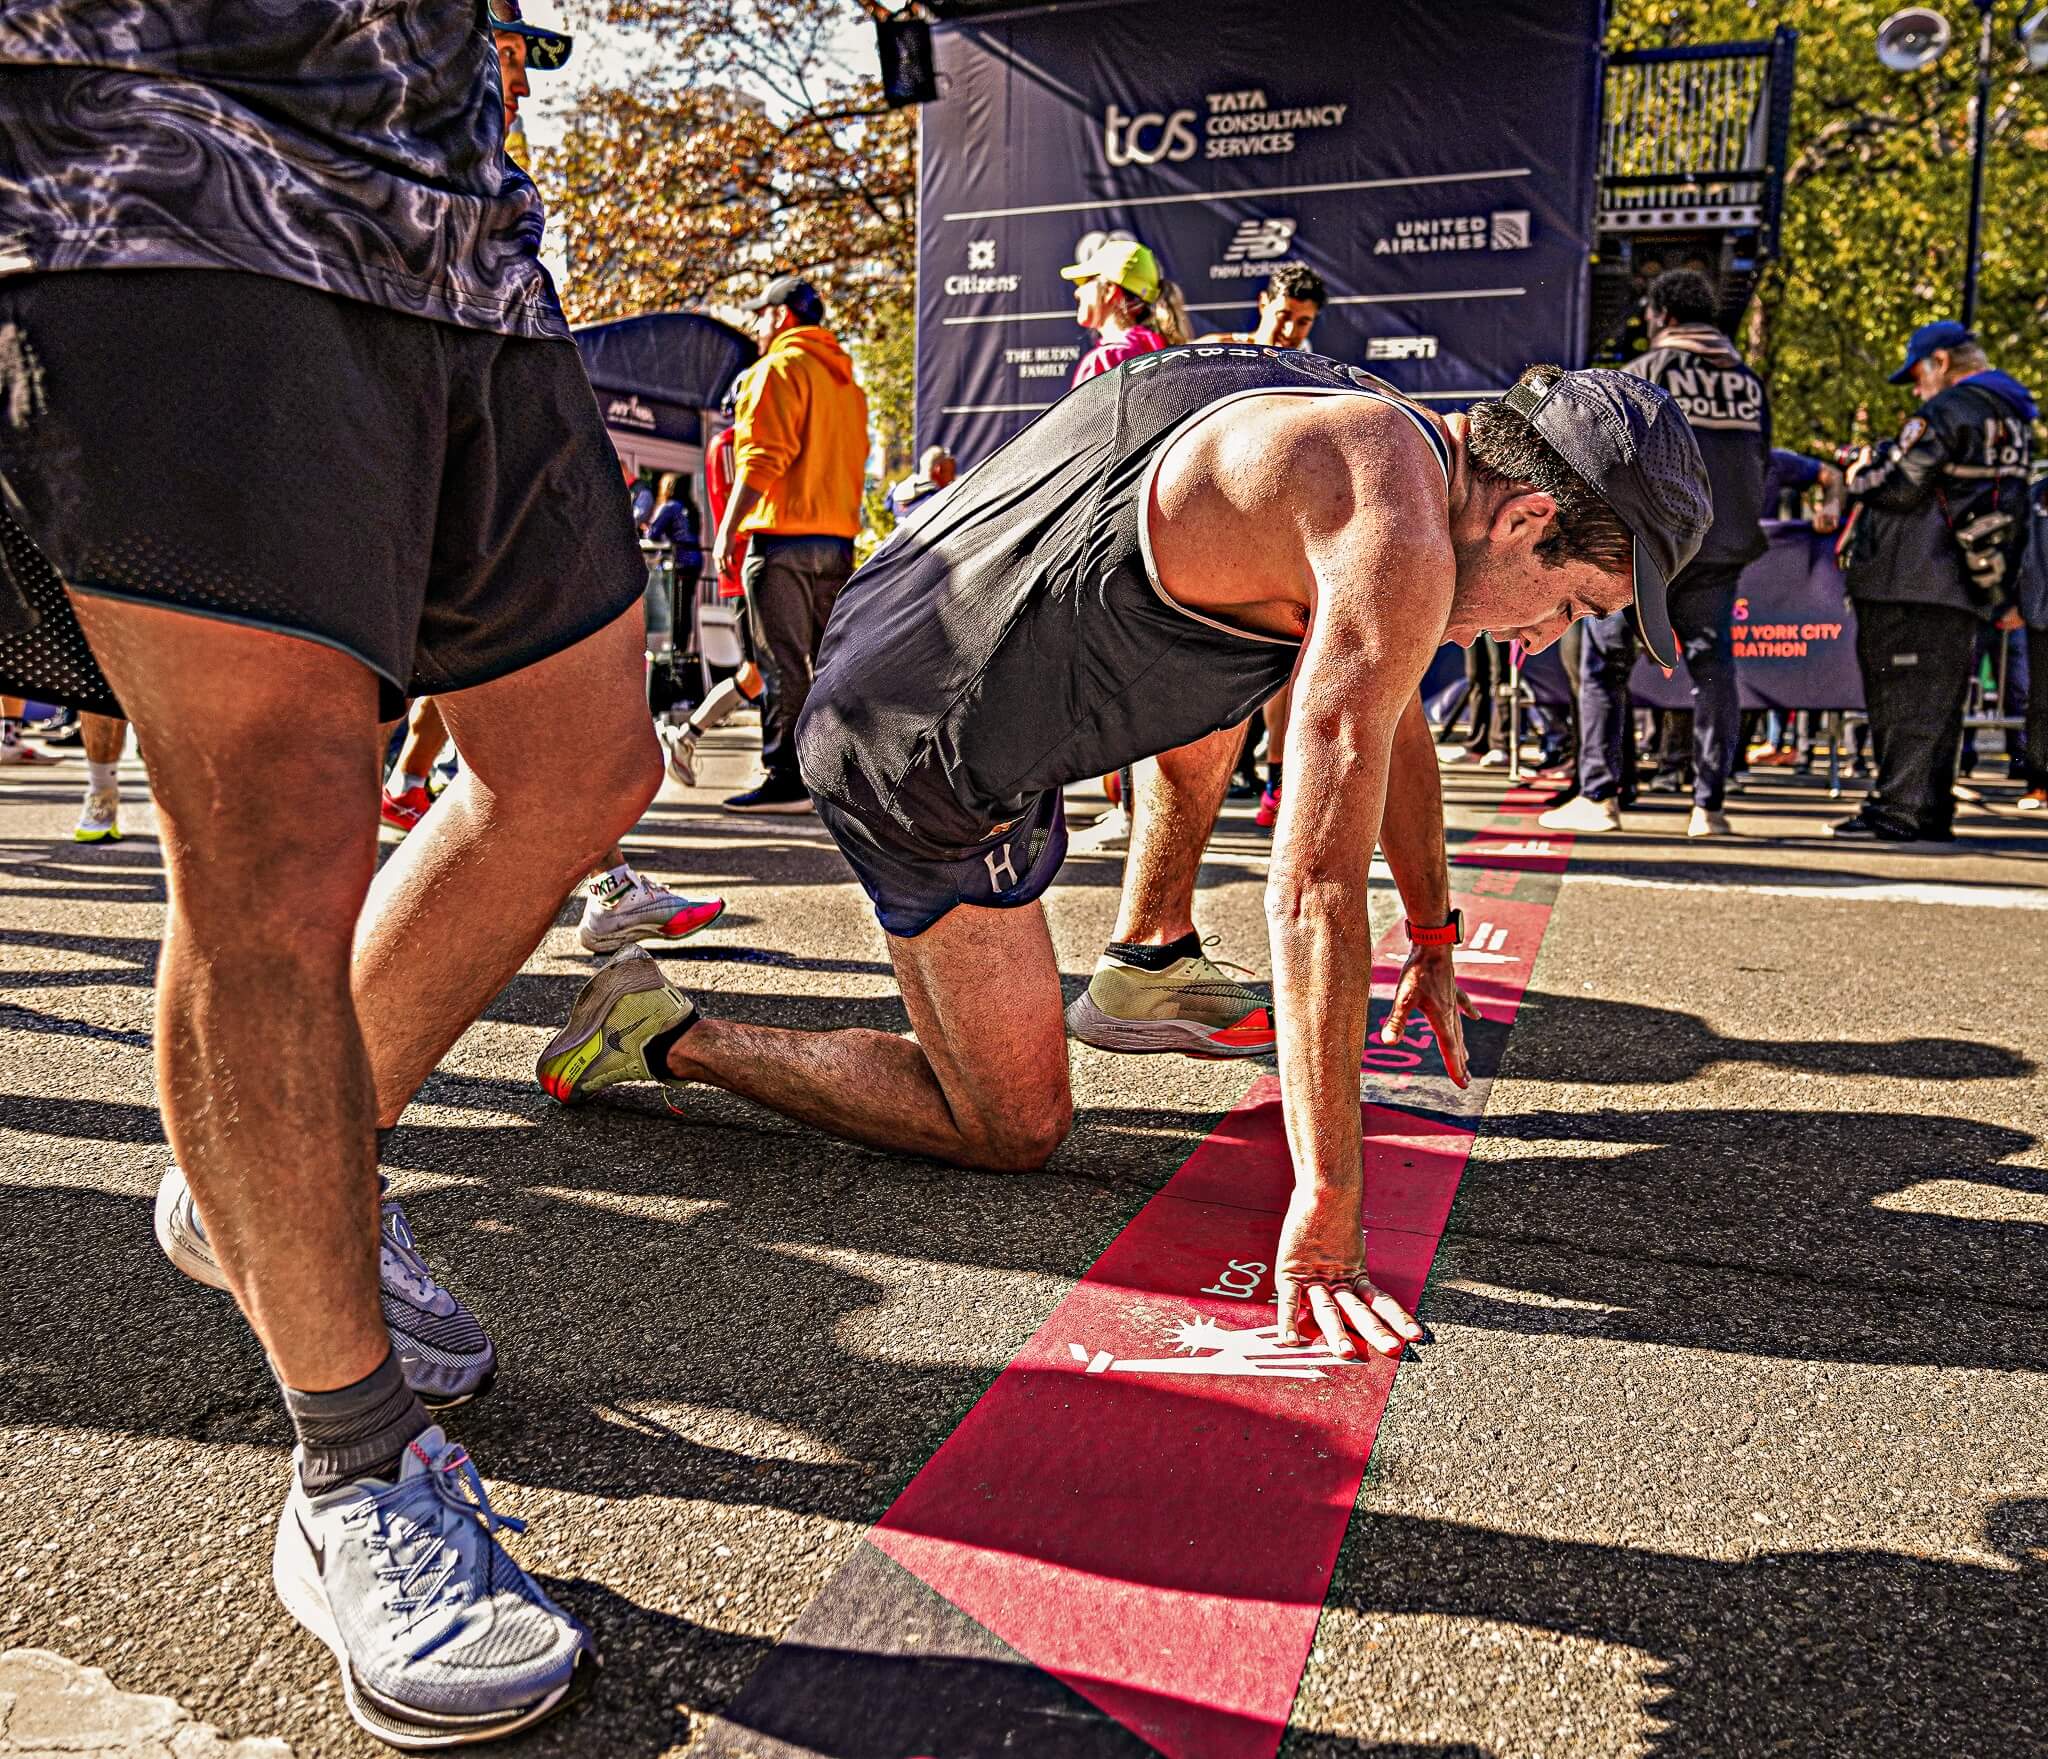 runners at the finish line